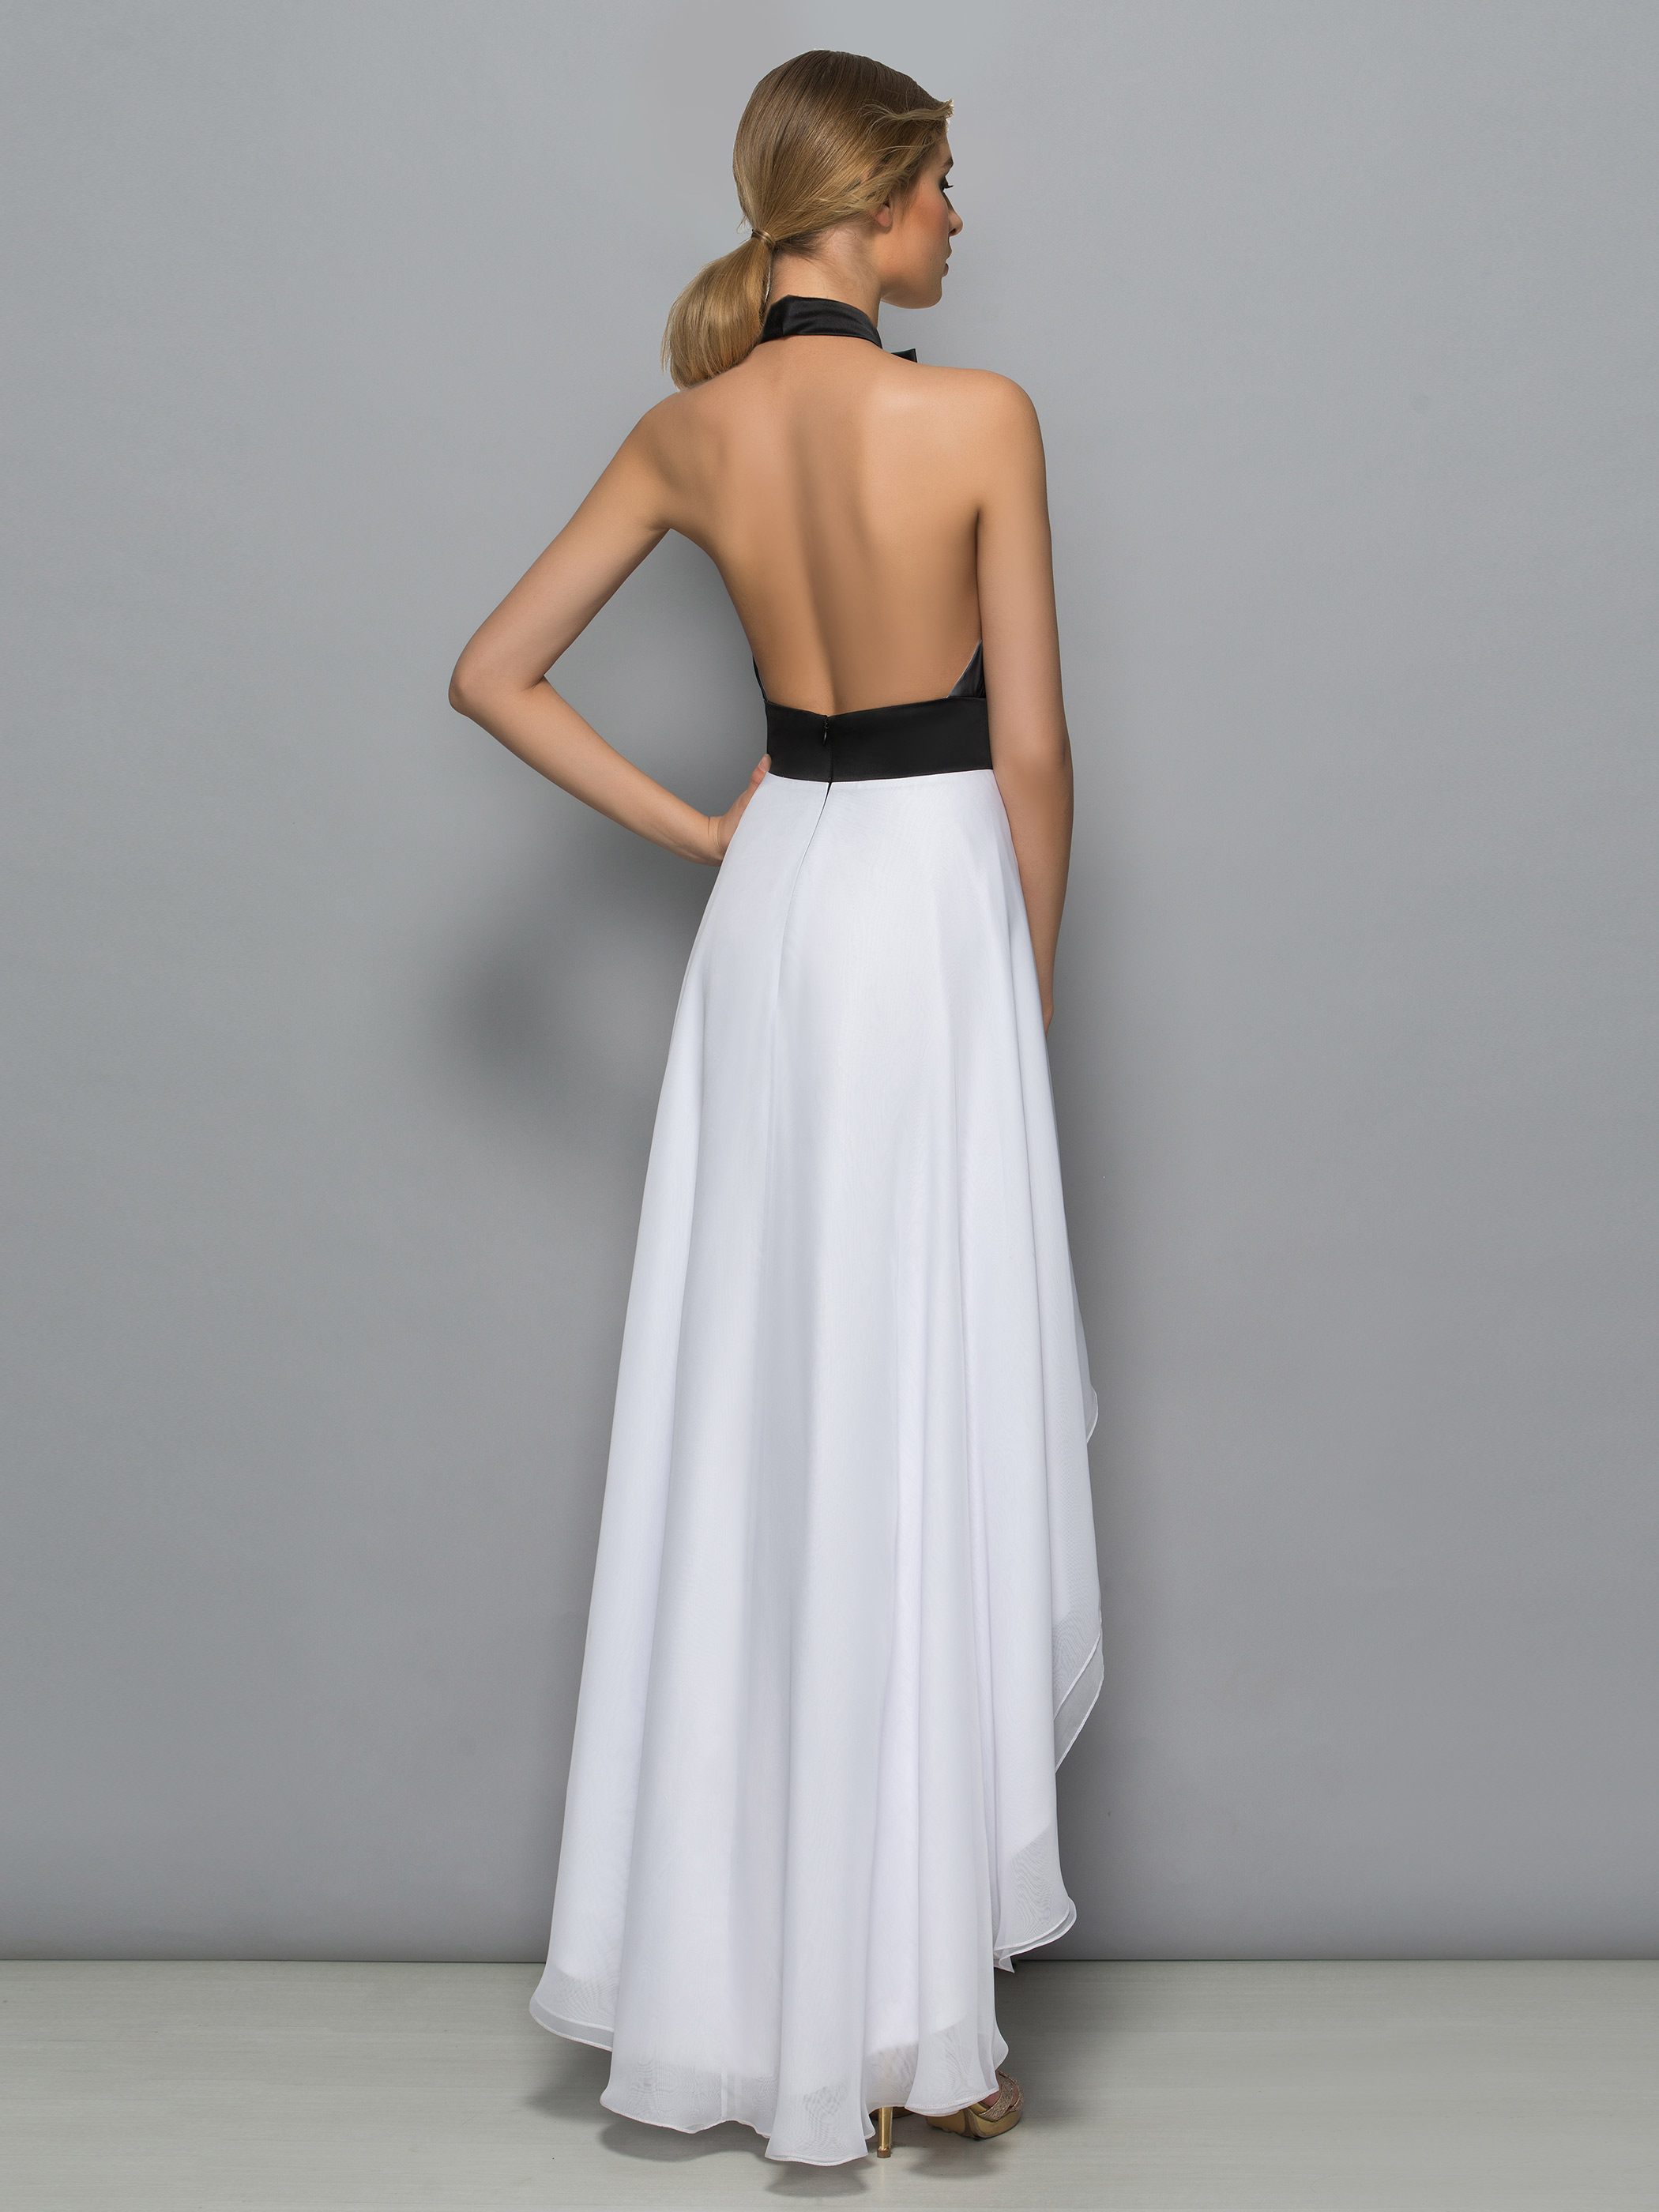 Ericdress Halter Bowknot High Low Backless Cocktail Dress